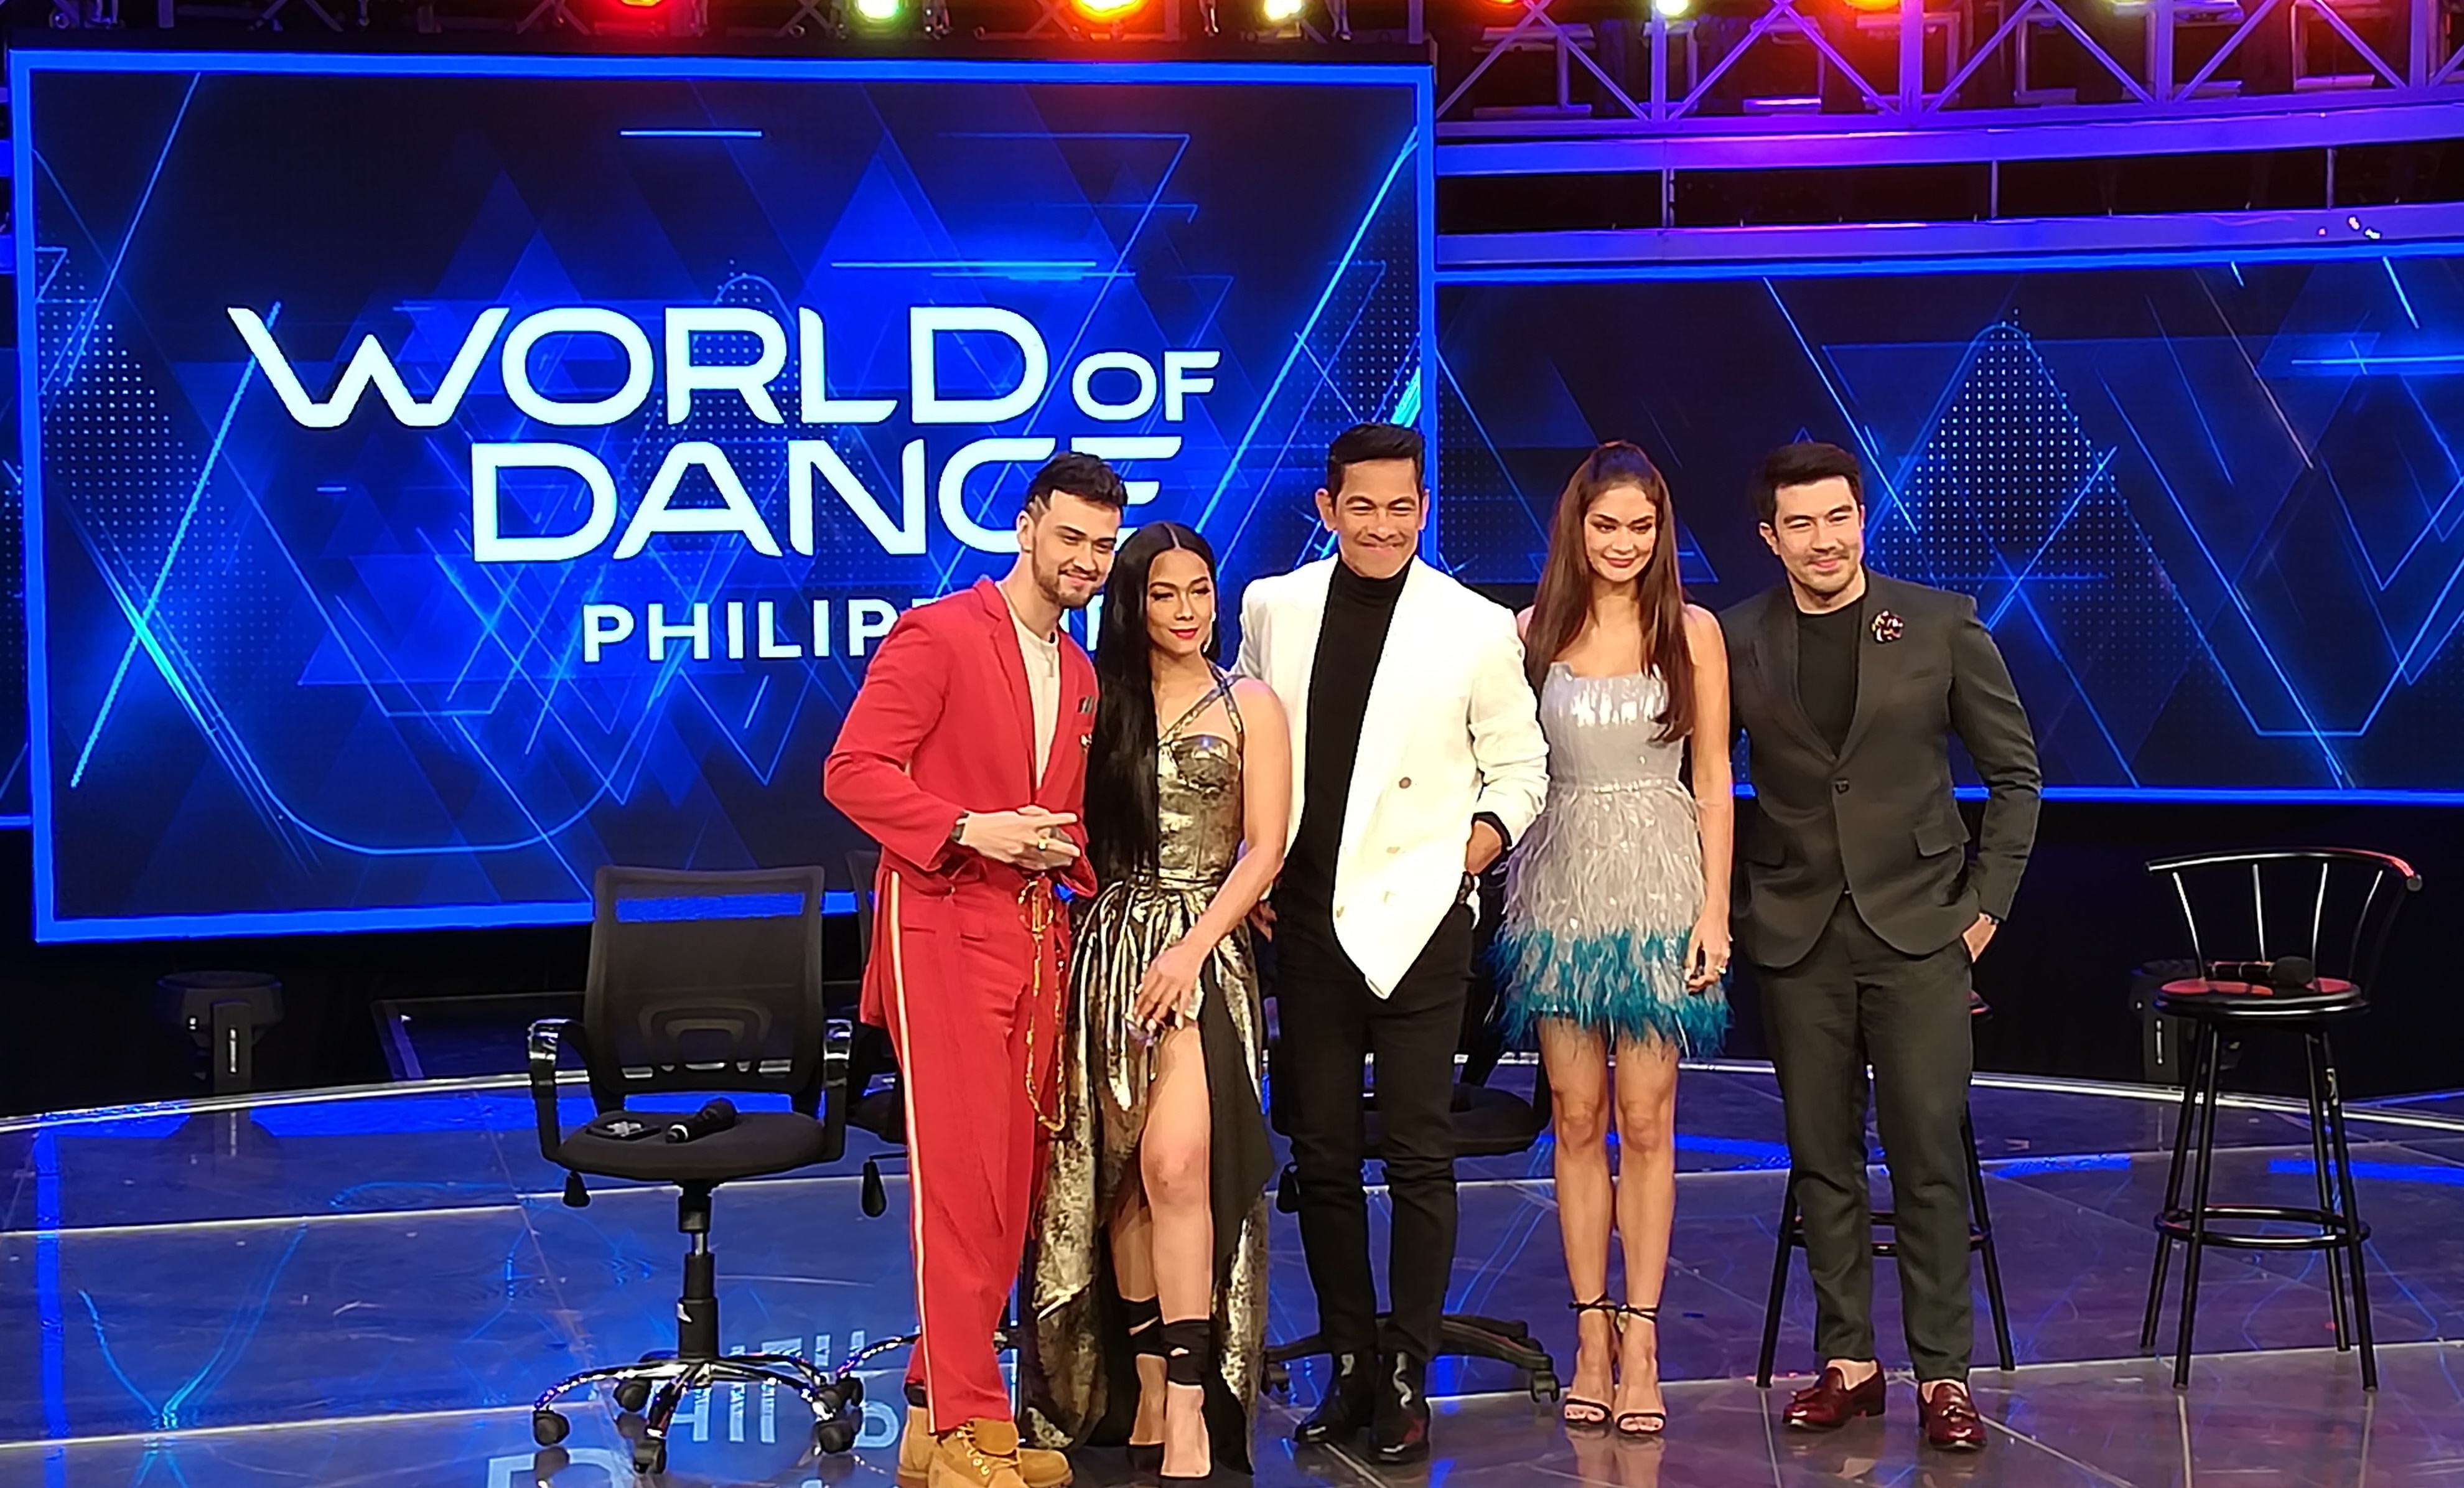 “World of Dance Philippines” is the top weekend show in the country